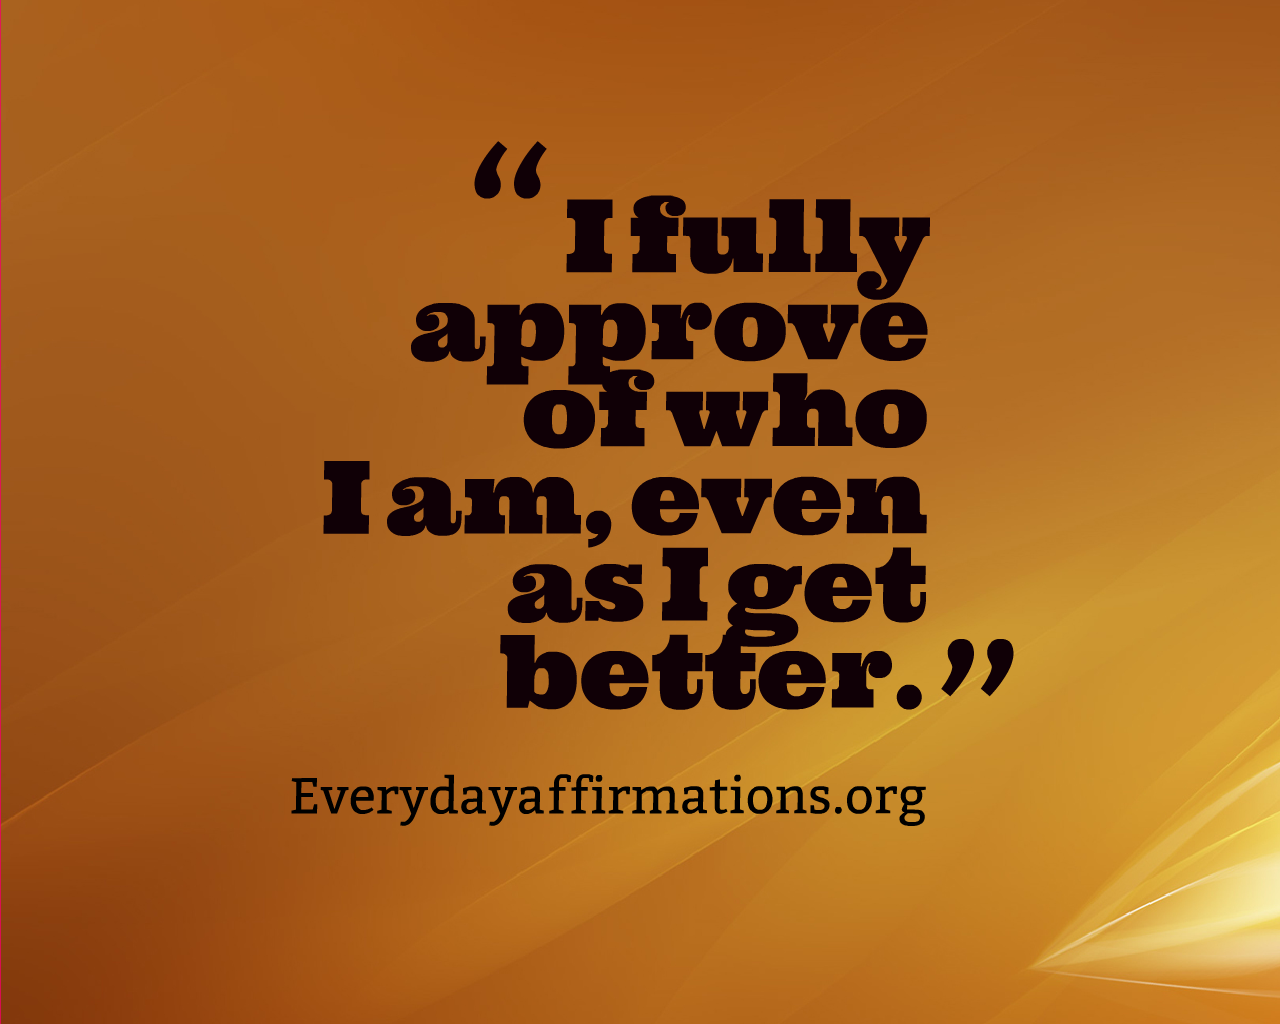 100 Powerful Positive Affirmations, Daily Affirmations 2014